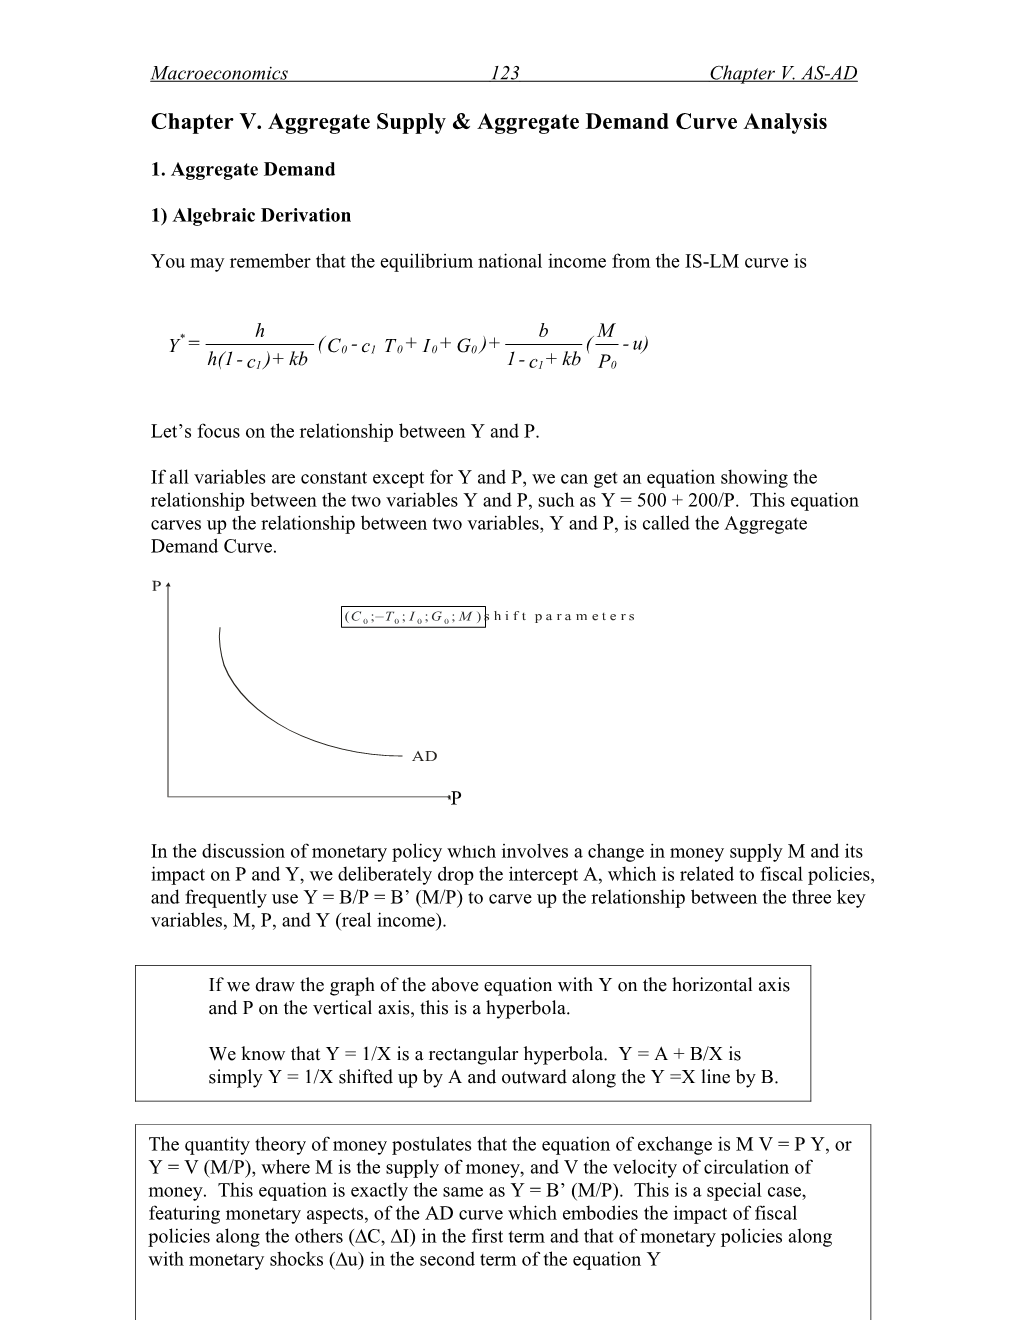 Chapter V. Aggregate Supply Aggregate Demand Curve Analysis